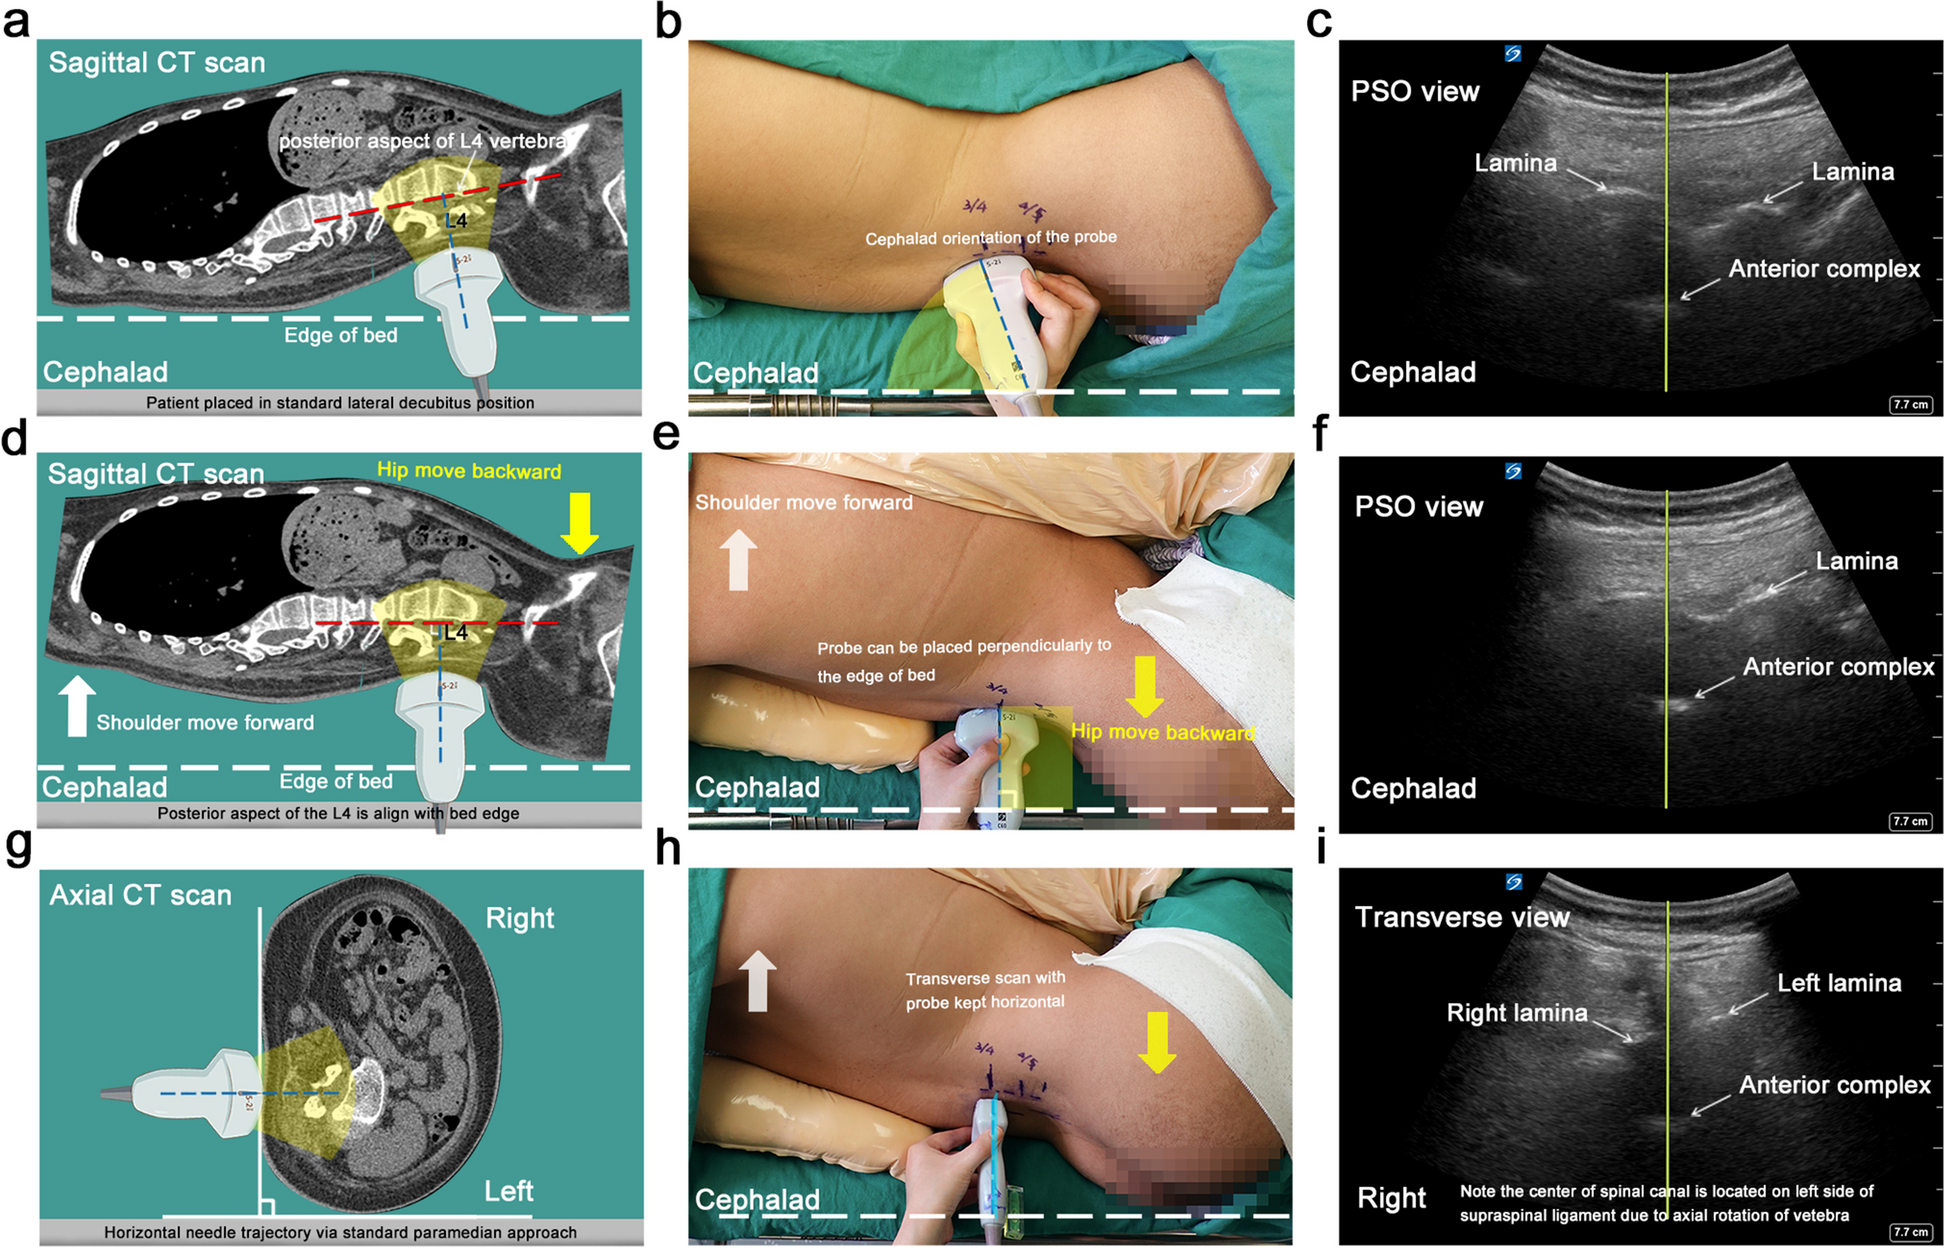 A horizontal and perpendicular interlaminar approach for intrathecal nusinersen injection in patients with spinal muscular atrophy and scoliosis: an observational study